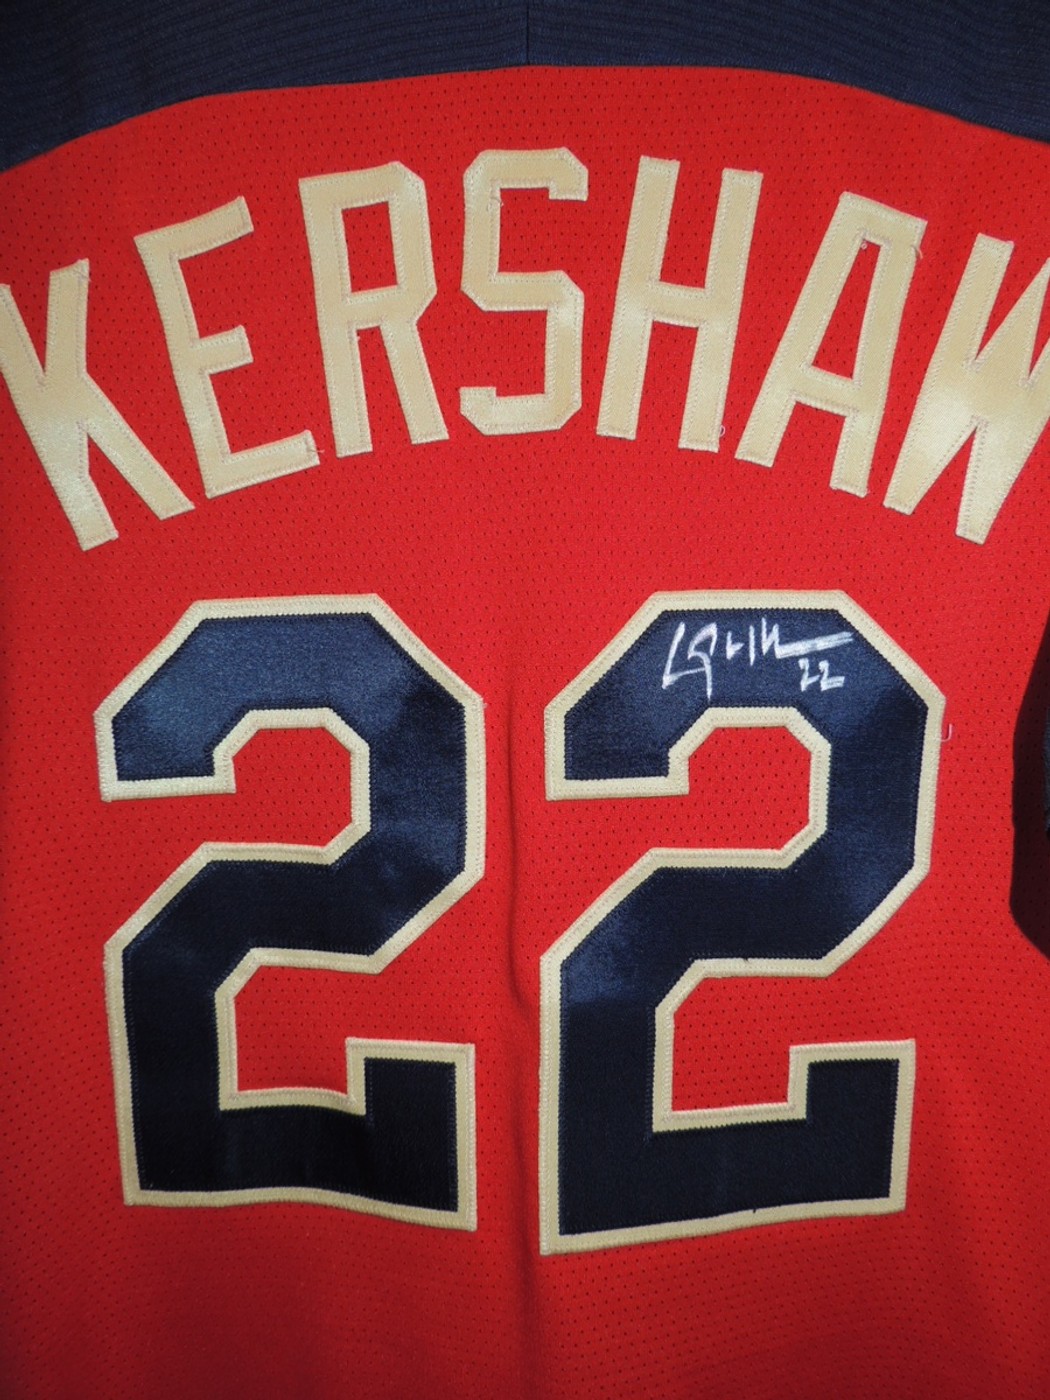 Clayton Kershaw Autographed 2014 All-Star Game NL Batting Practice